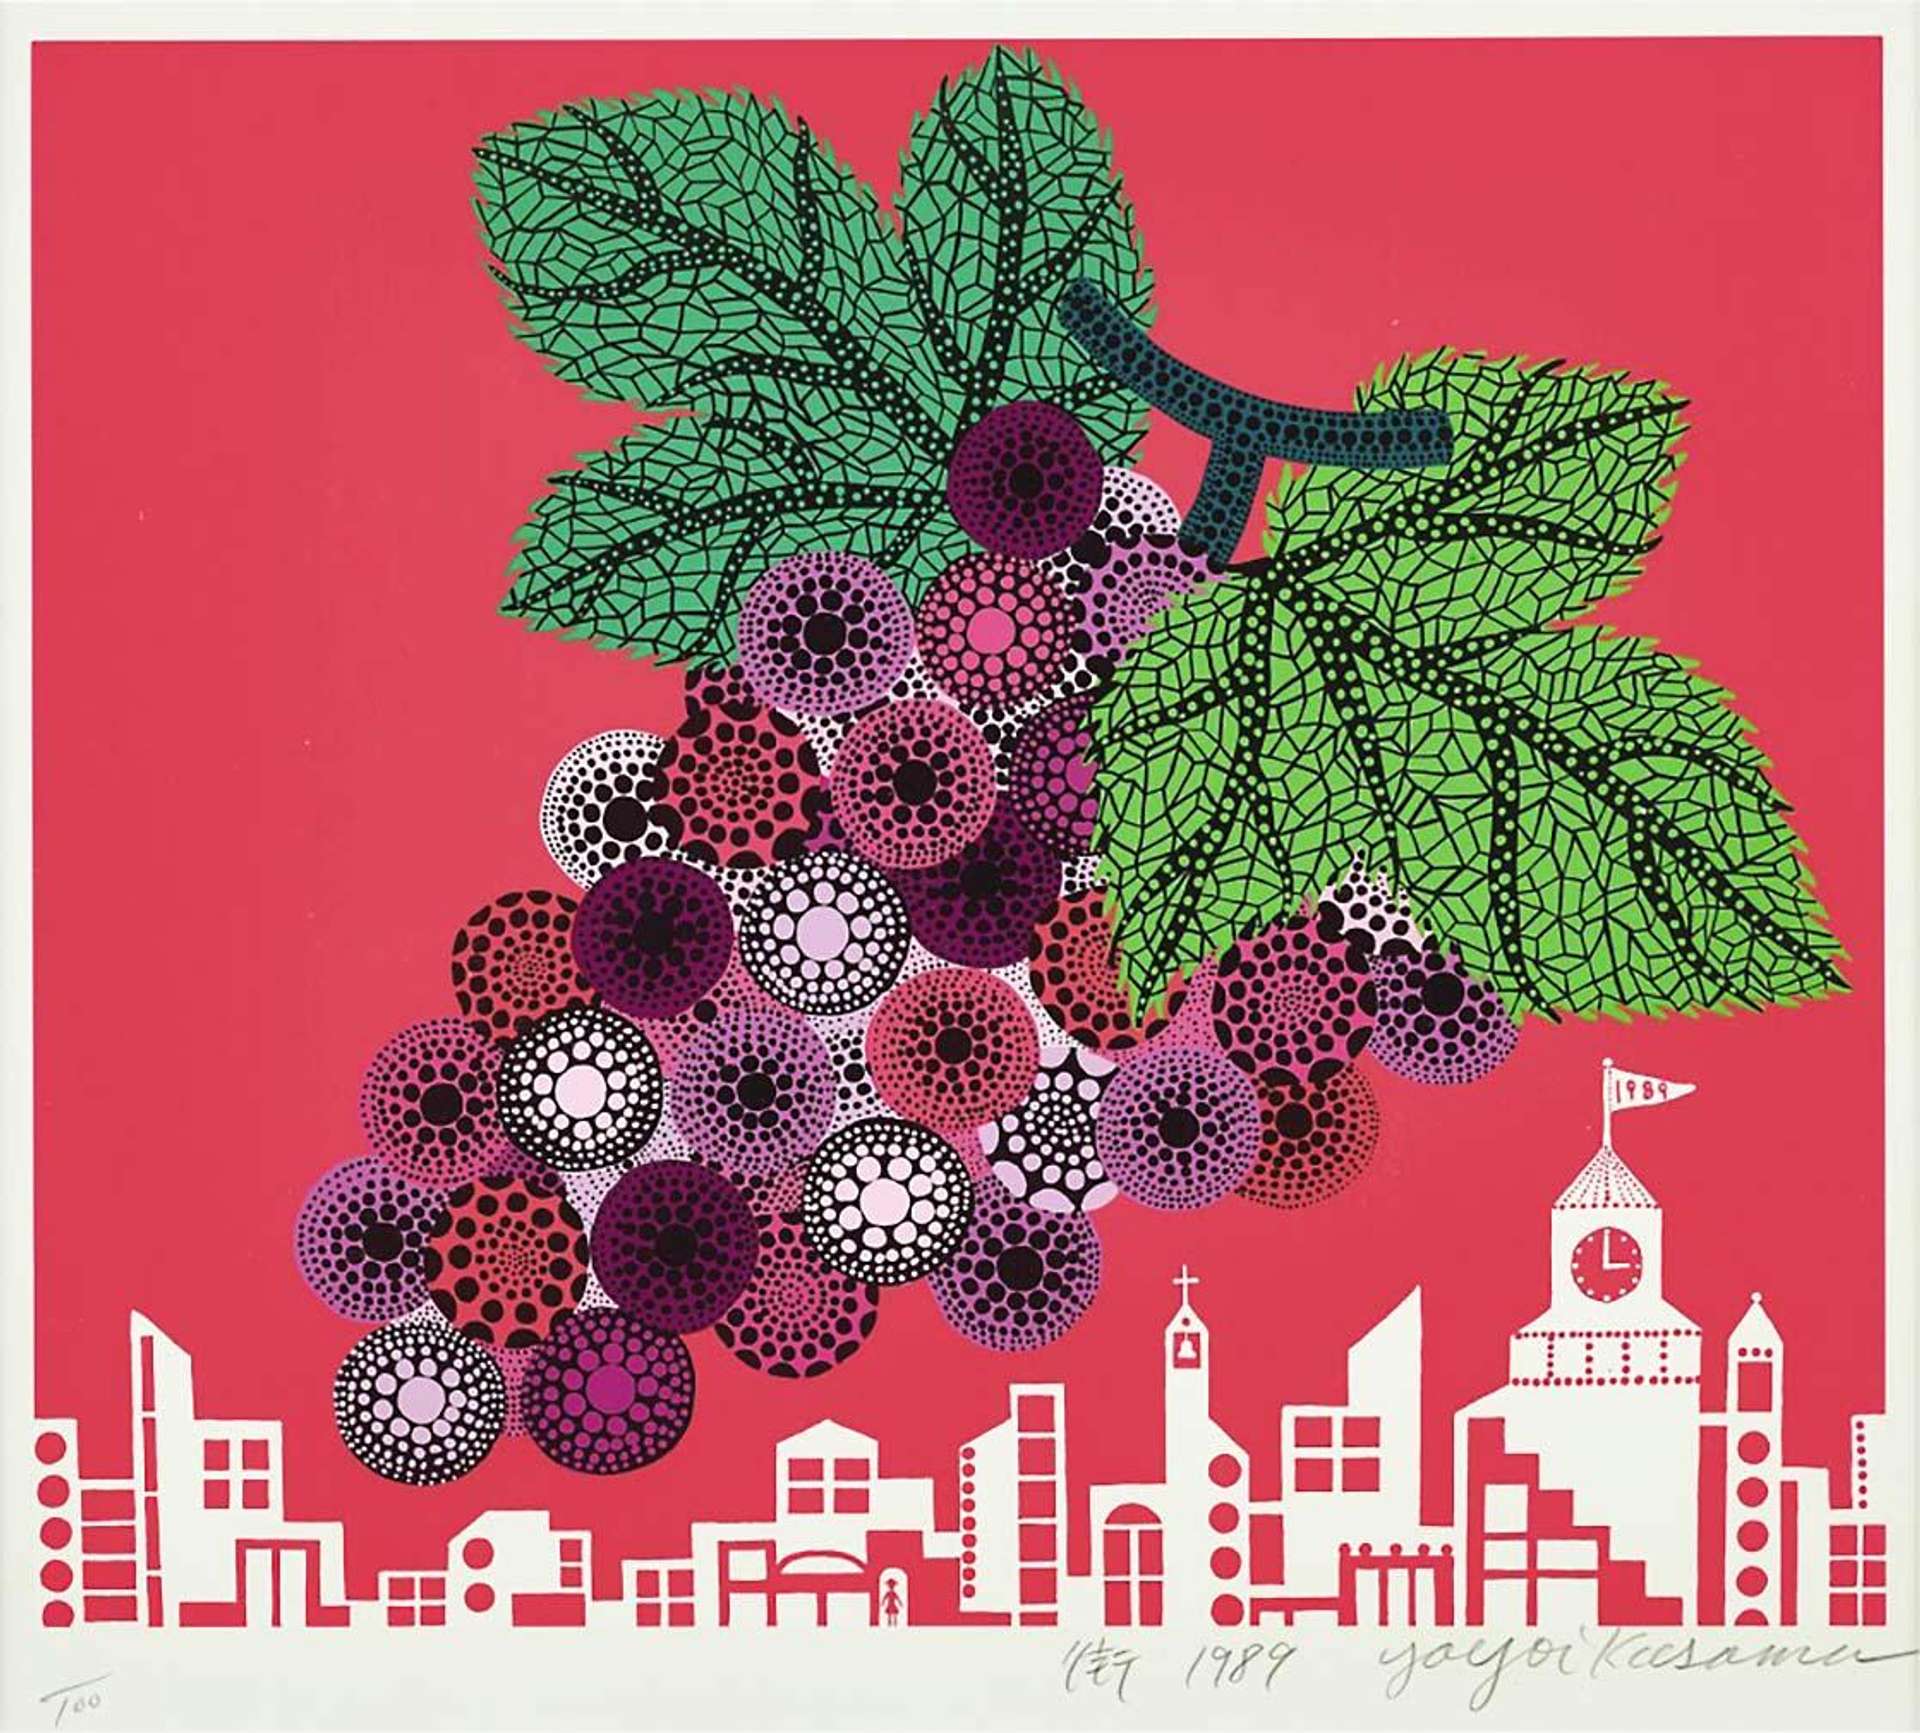 Yayoi Kusama’s Grapes In The City. A screenprint of grapes against a red background and city landscape. 